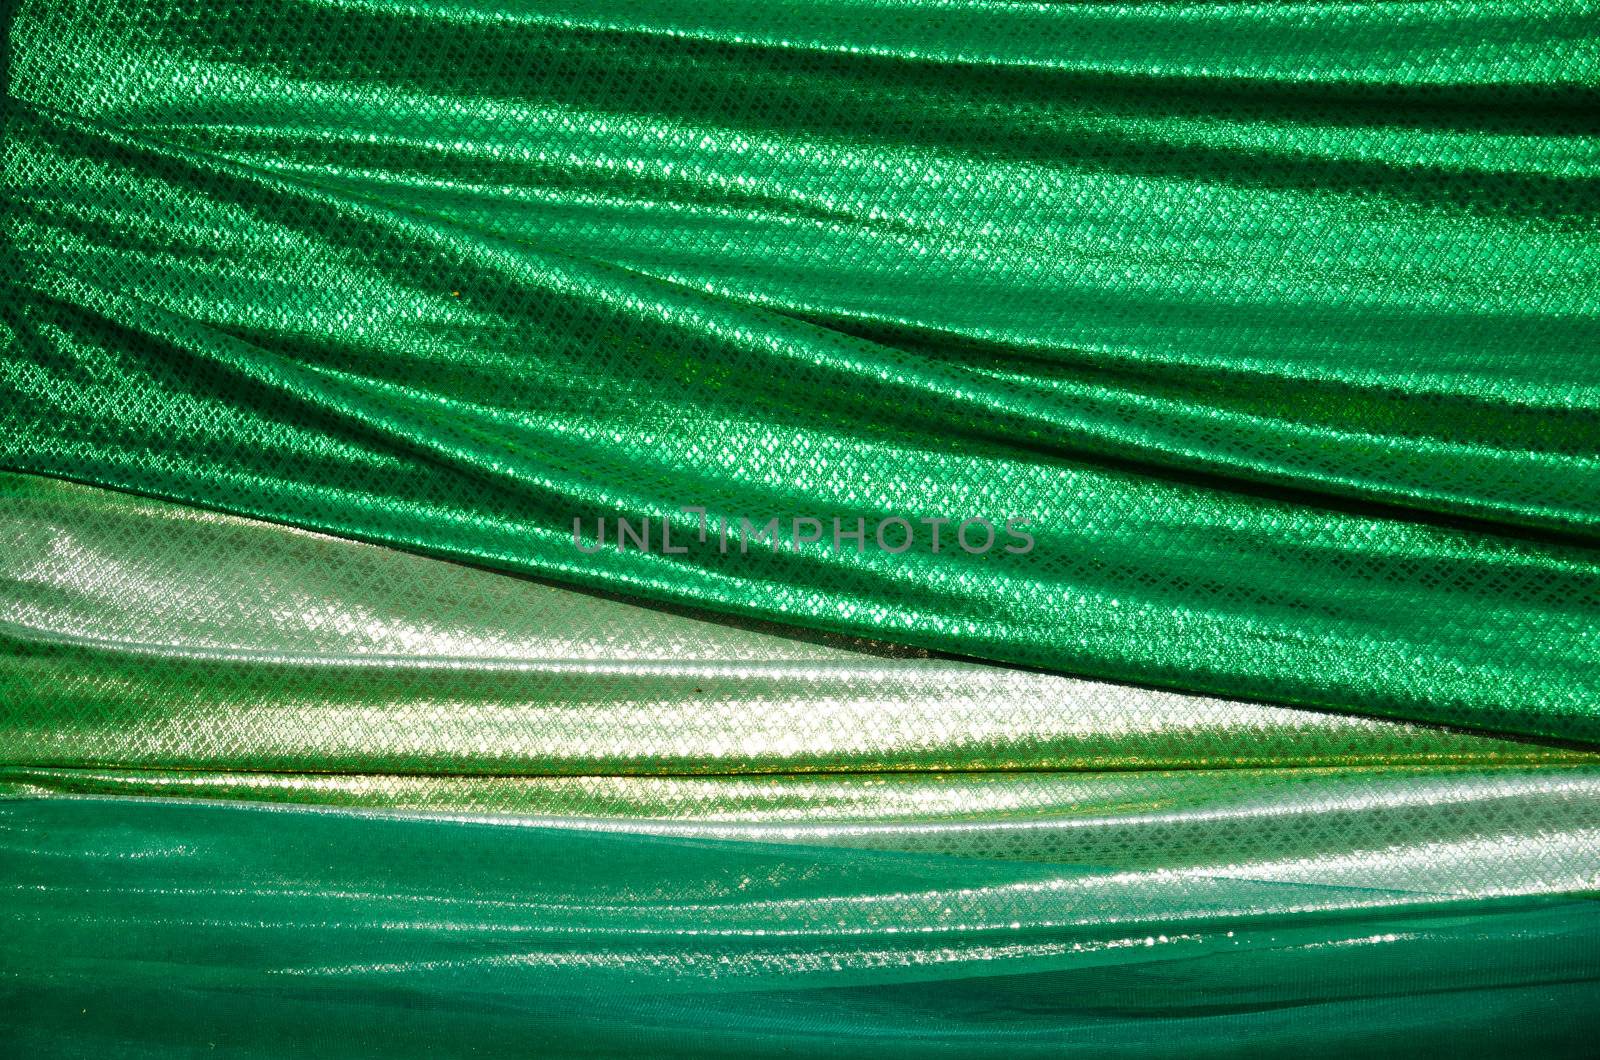 The surface of the green cloth.